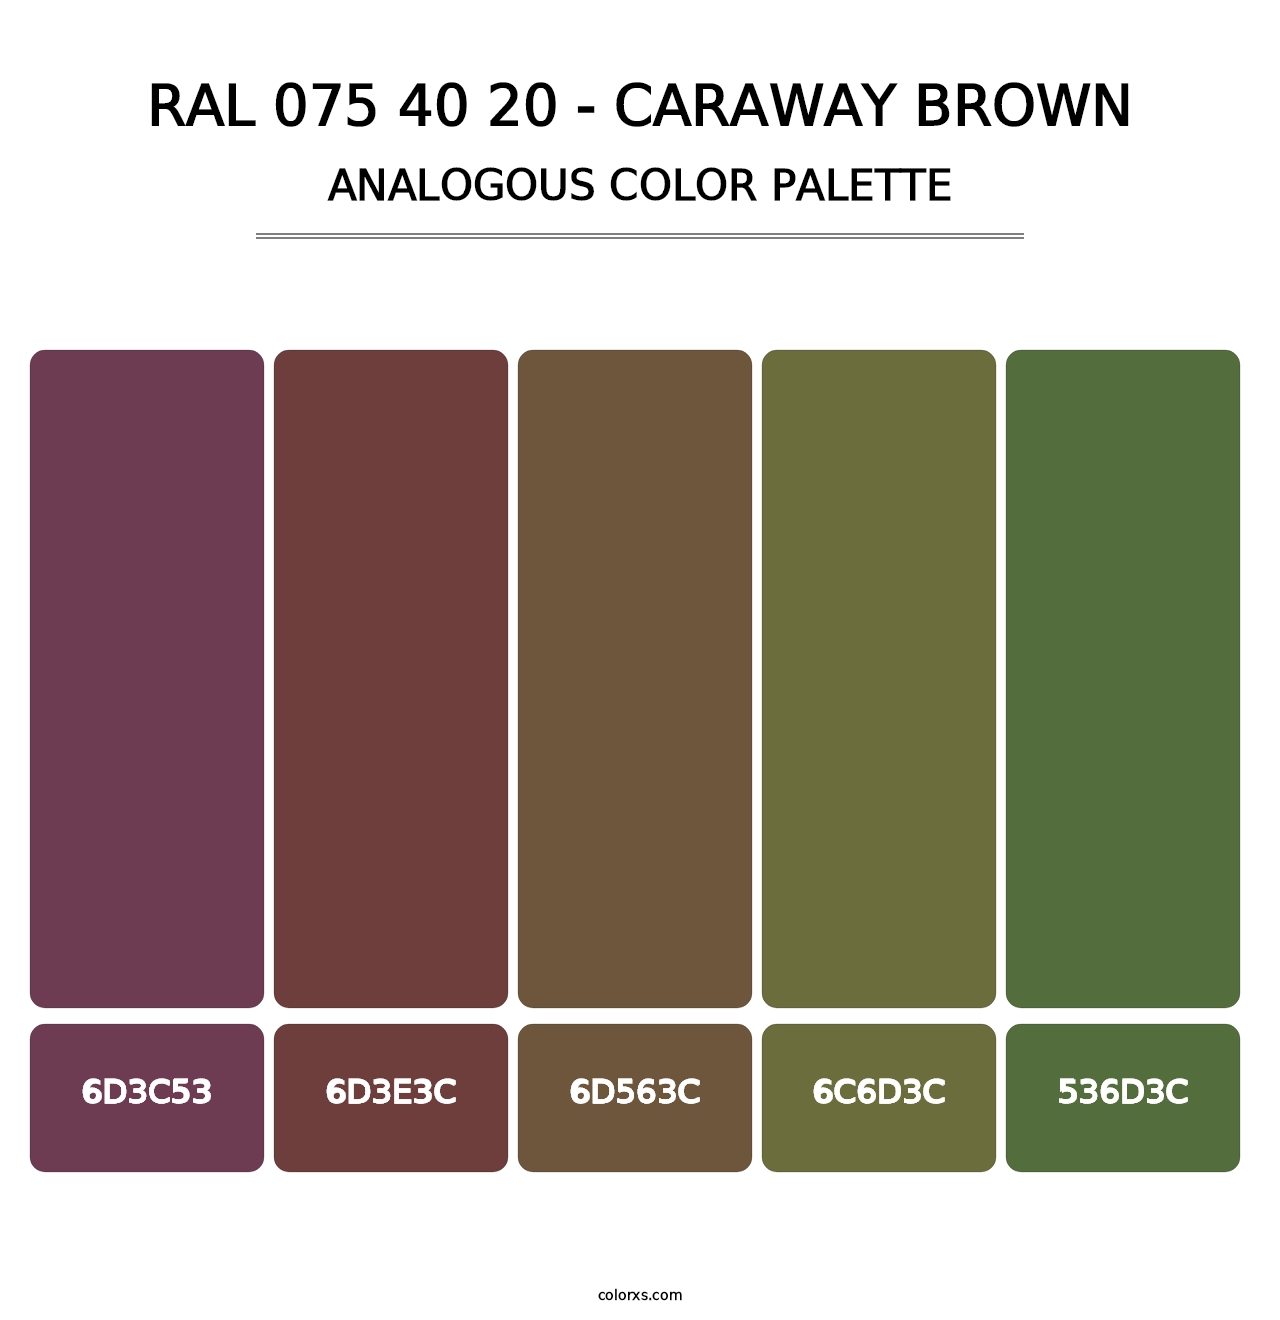 RAL 075 40 20 - Caraway Brown - Analogous Color Palette